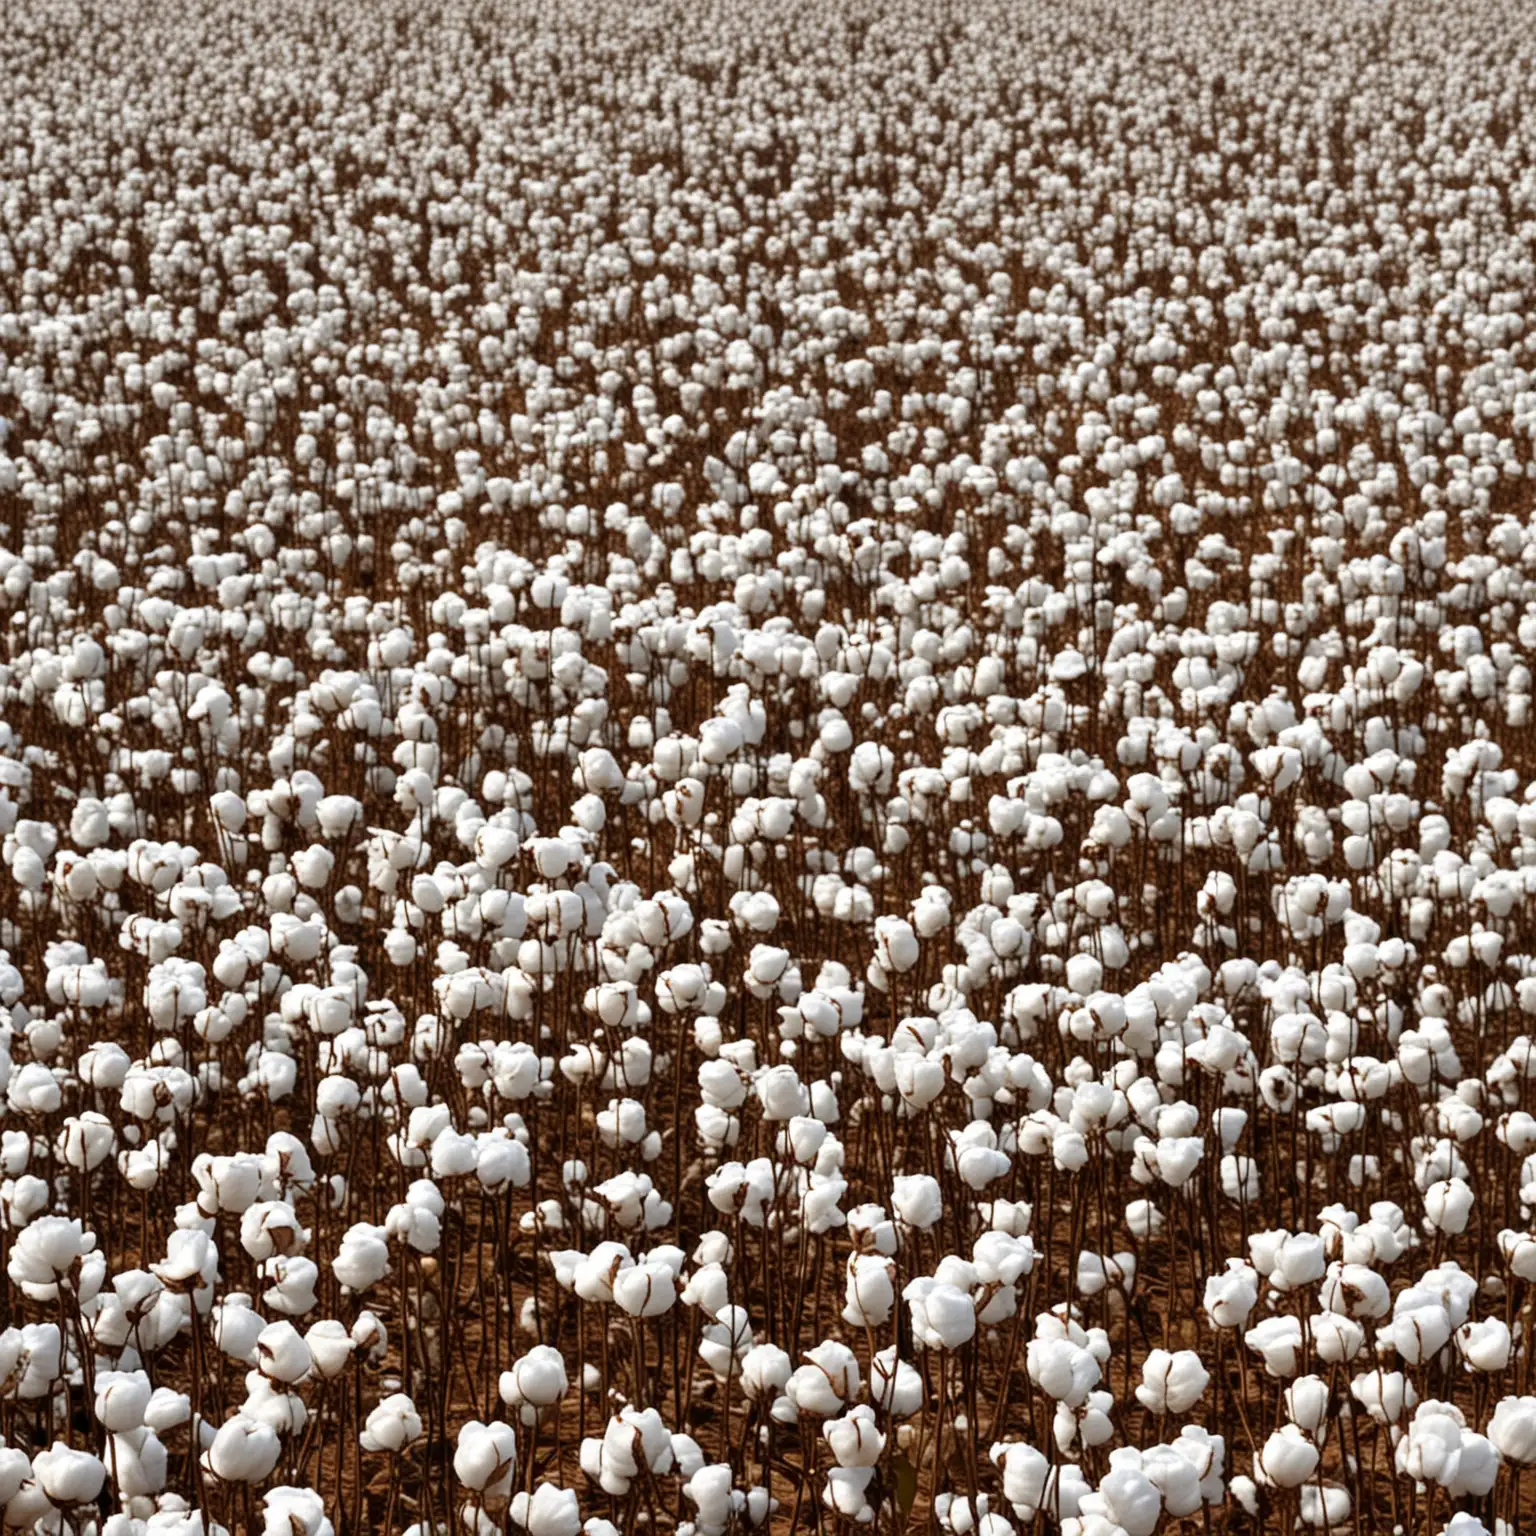 Vibrant Cotton Fields Blossoming Beauty of the Rural Landscape